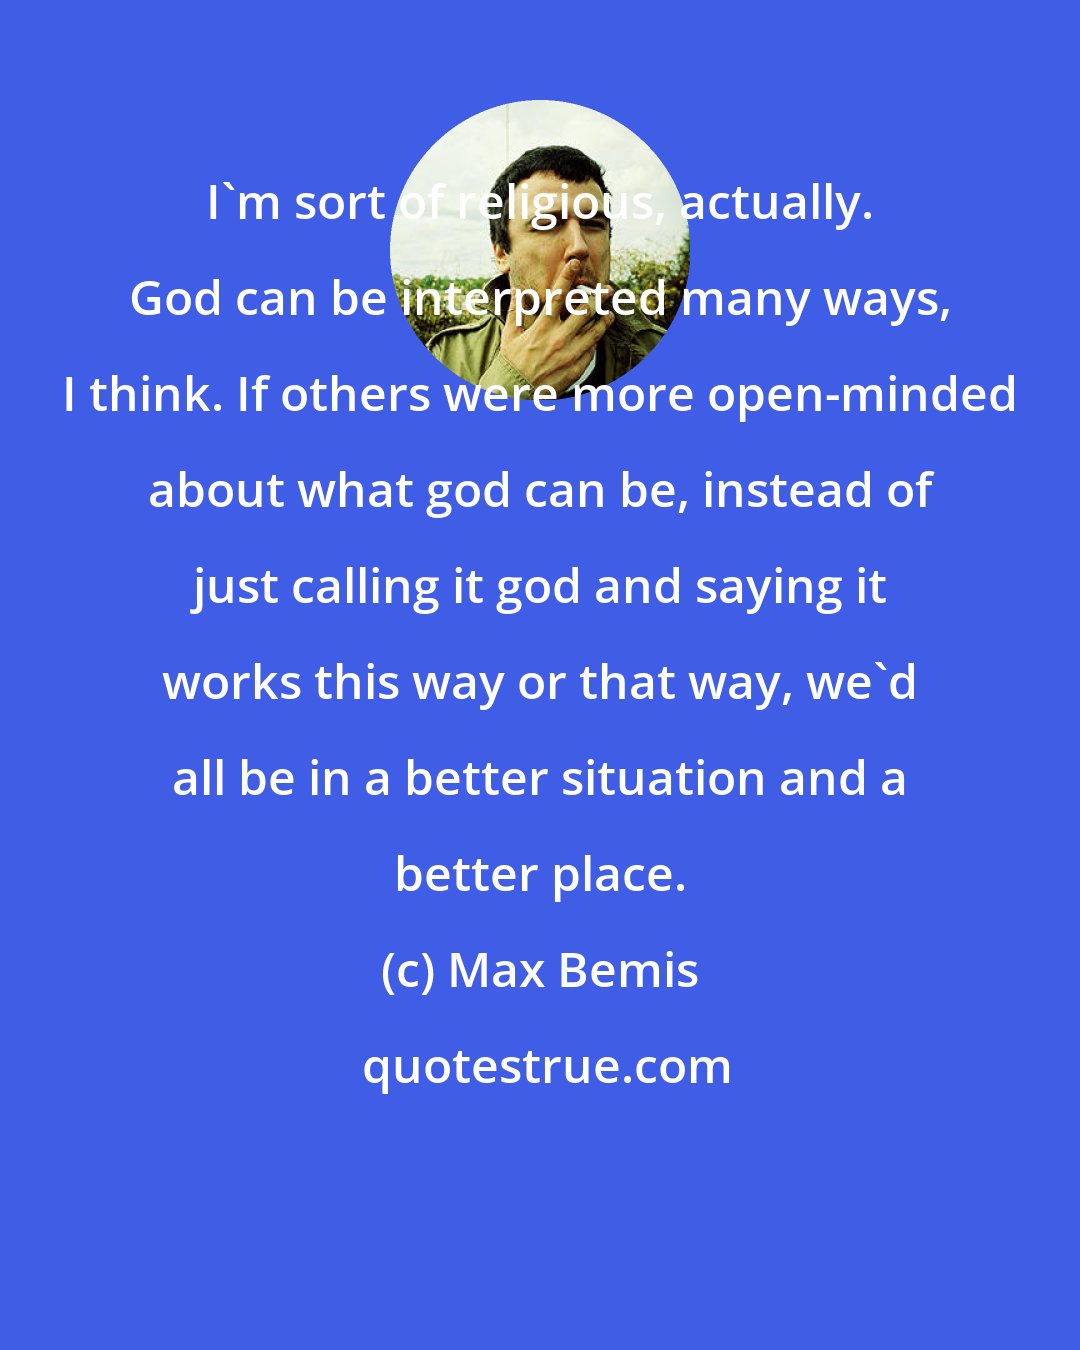 Max Bemis: I'm sort of religious, actually. God can be interpreted many ways, I think. If others were more open-minded about what god can be, instead of just calling it god and saying it works this way or that way, we'd all be in a better situation and a better place.